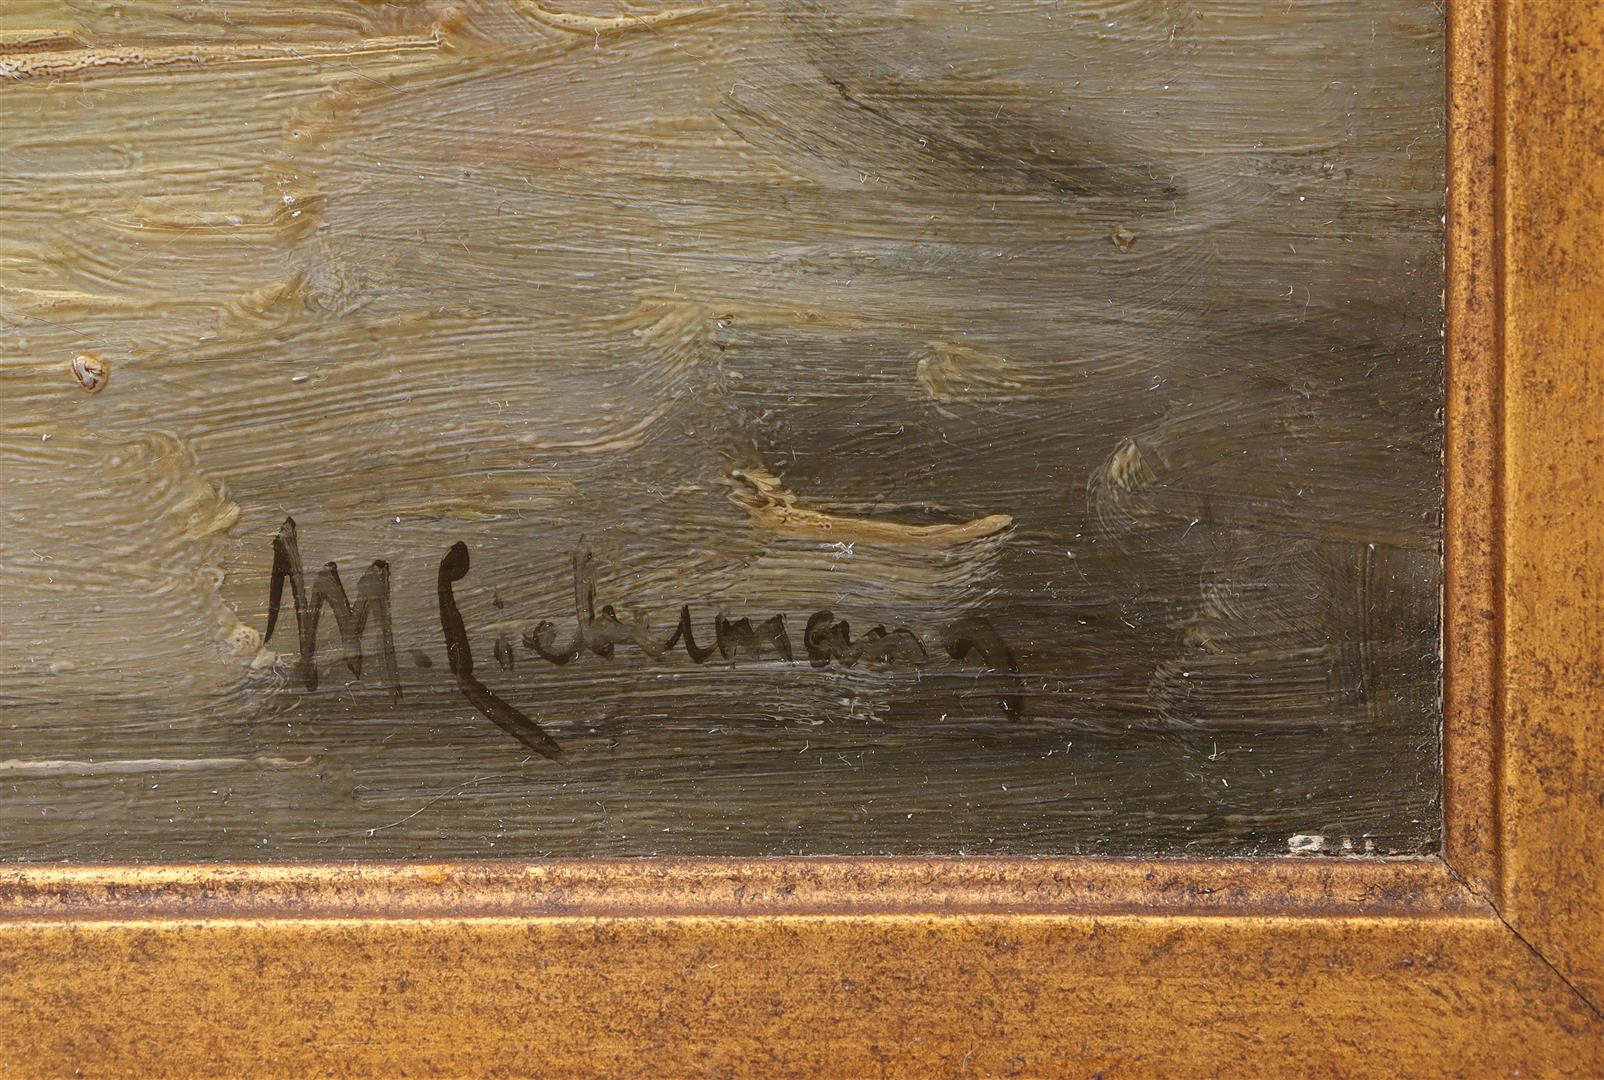 With signature Liebermann - Image 4 of 5